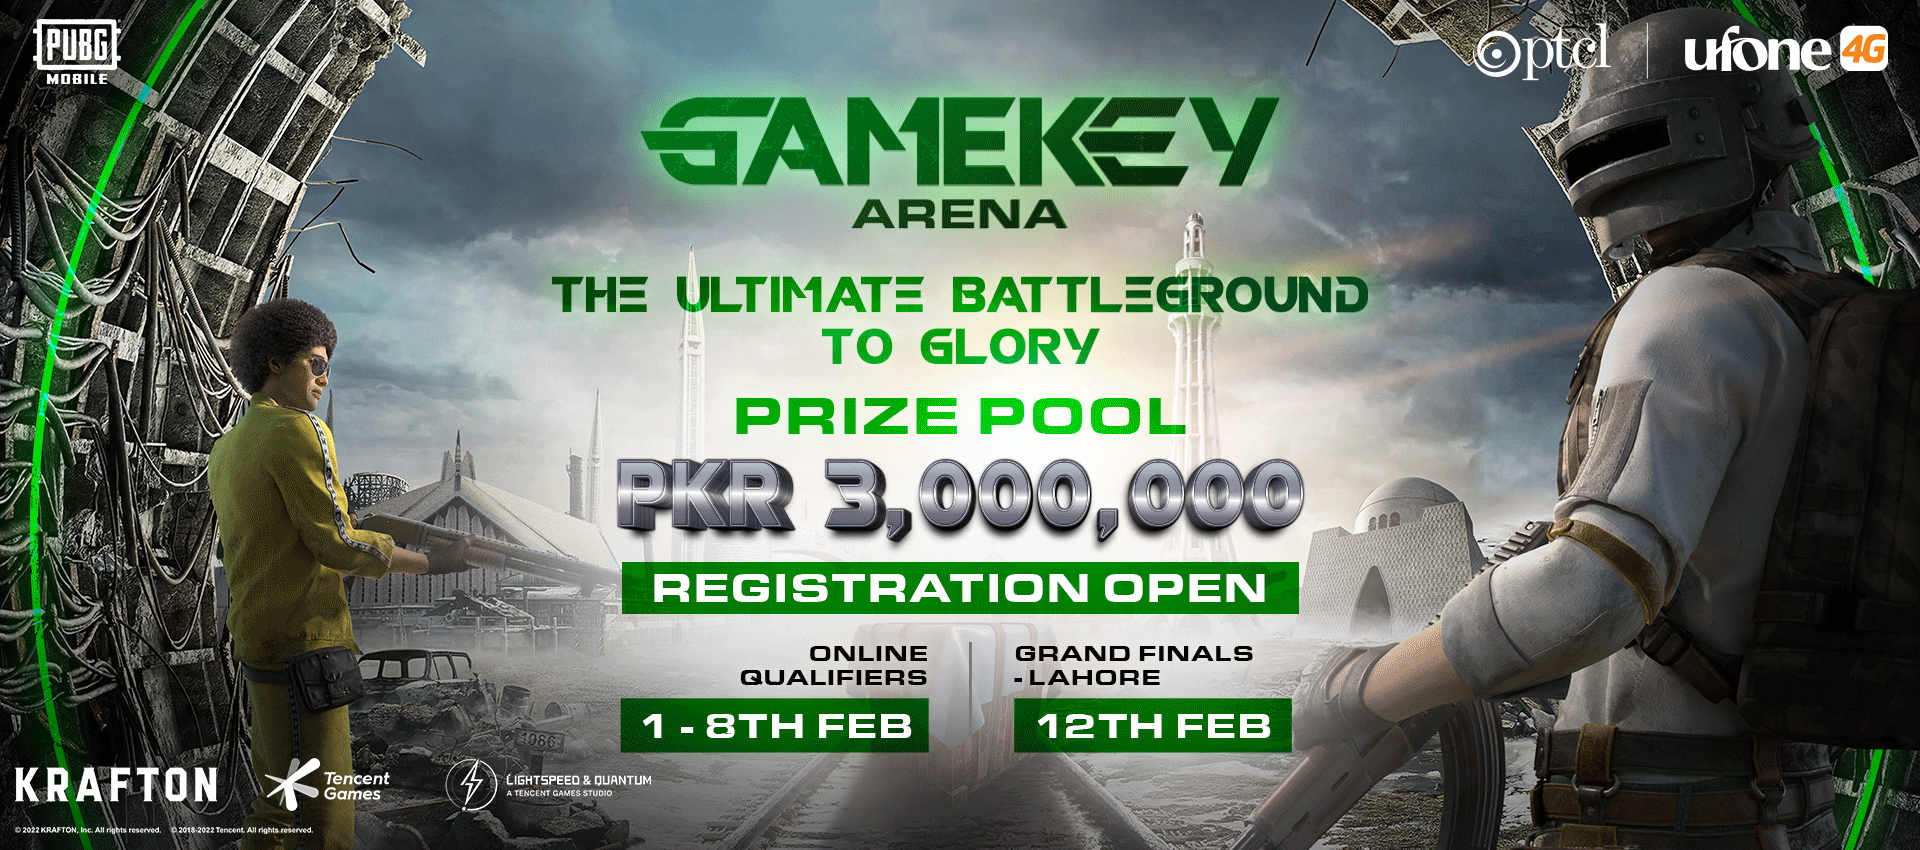 Gamers gear up! As PTCL Group brings the biggest E-Sports gaming competition – ‘GameKey Arena’